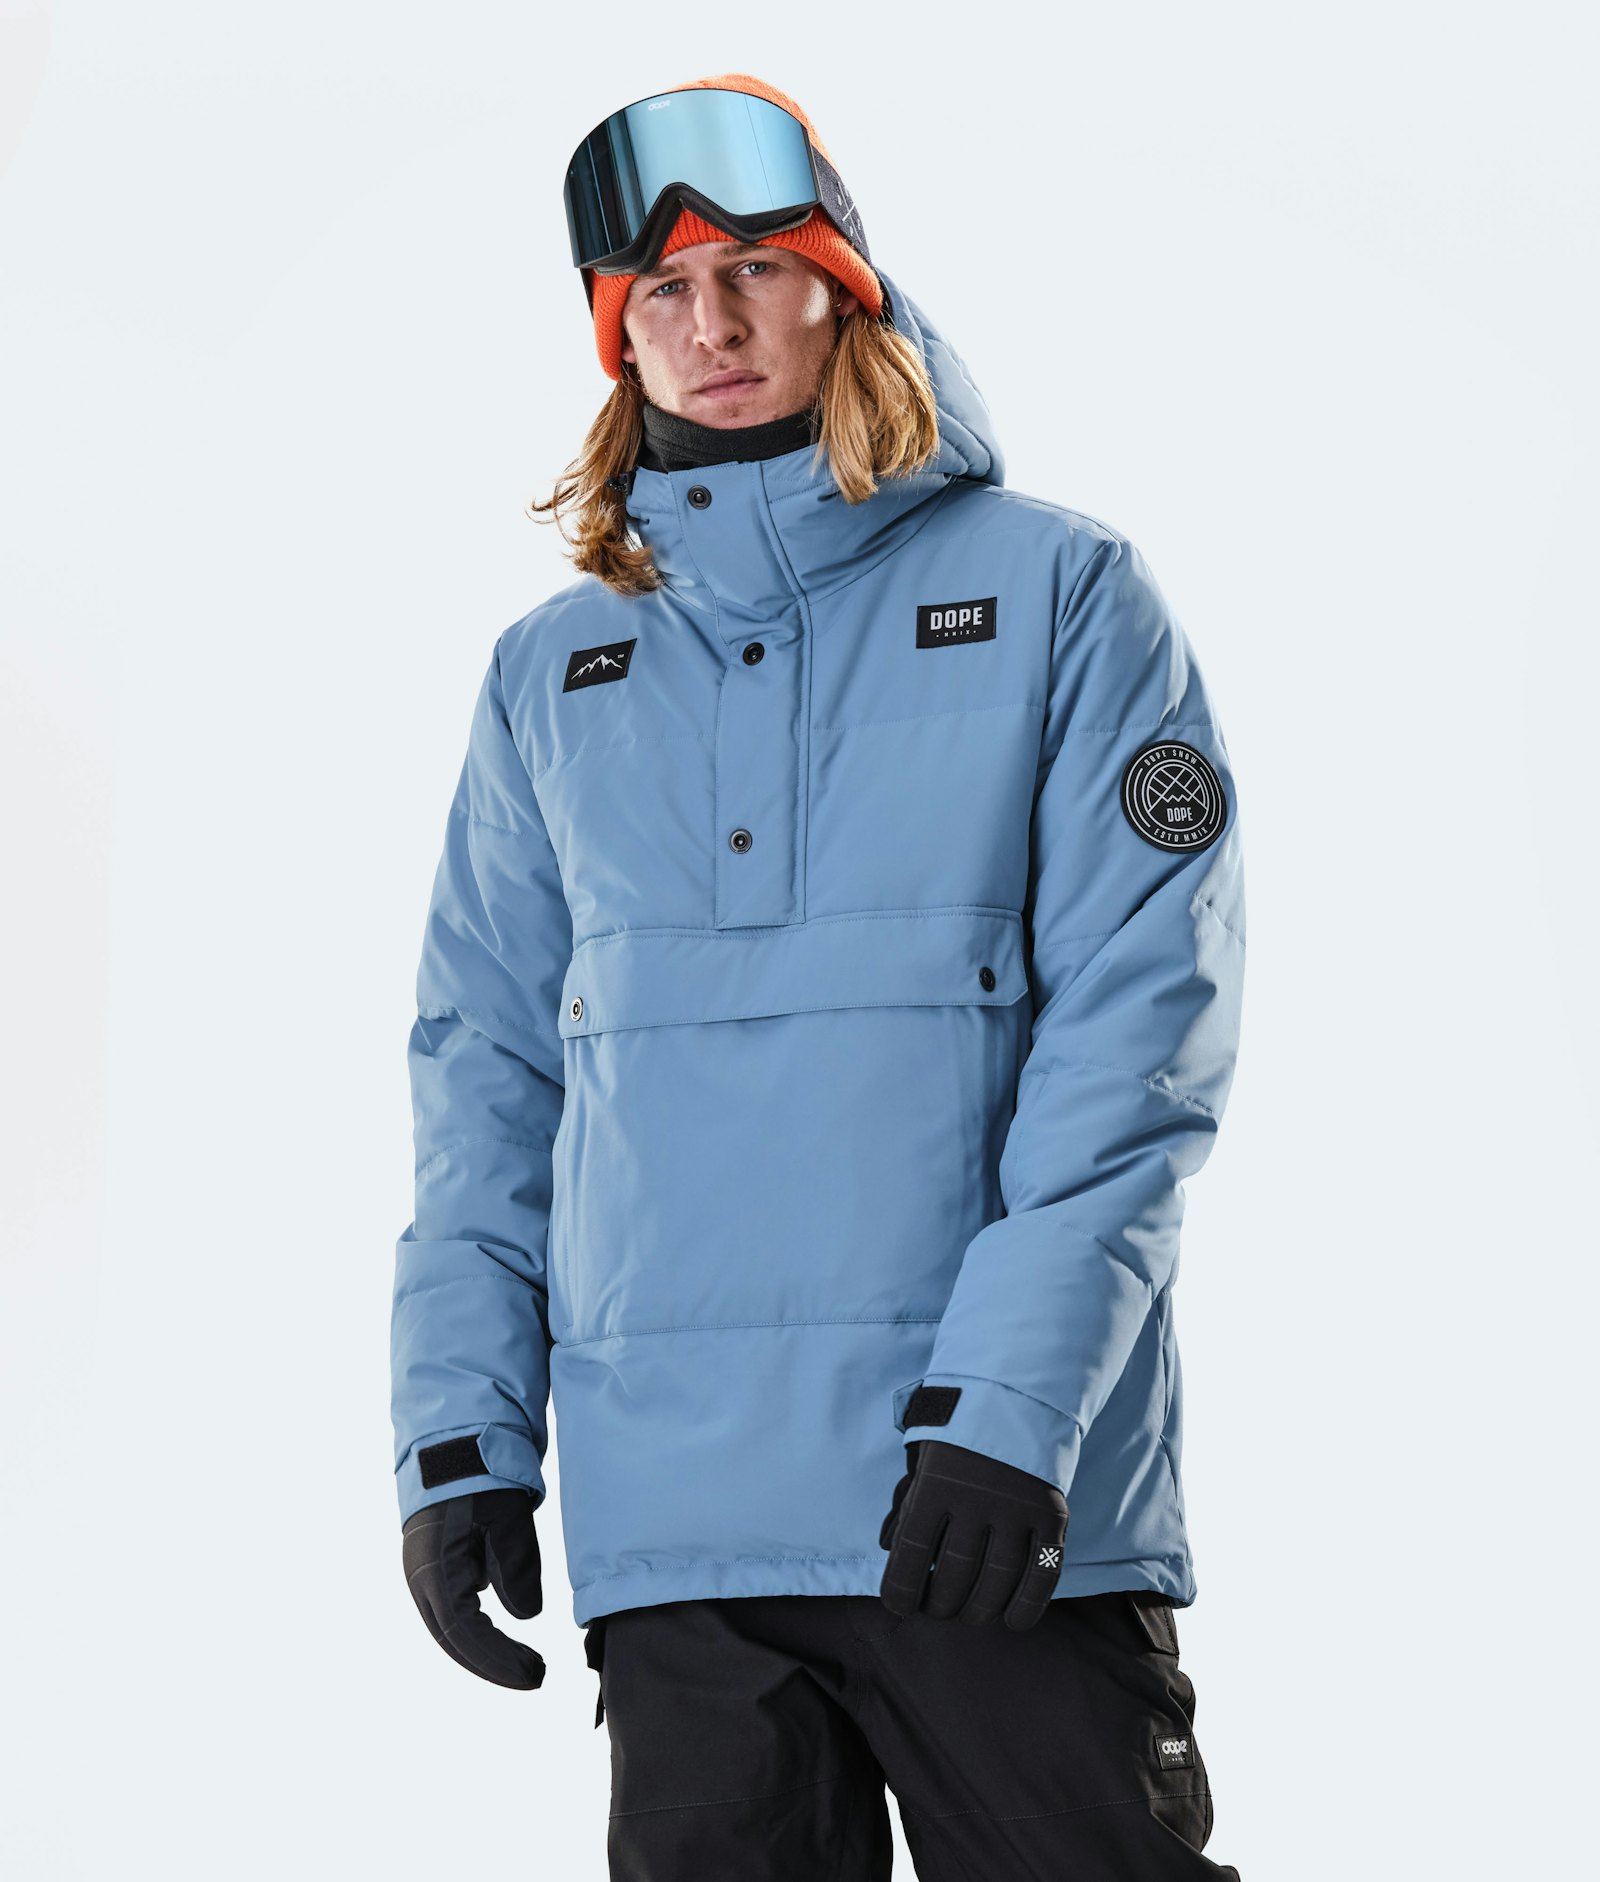 Dope Puffer 2020 Giacca Sci Uomo Blue Steel